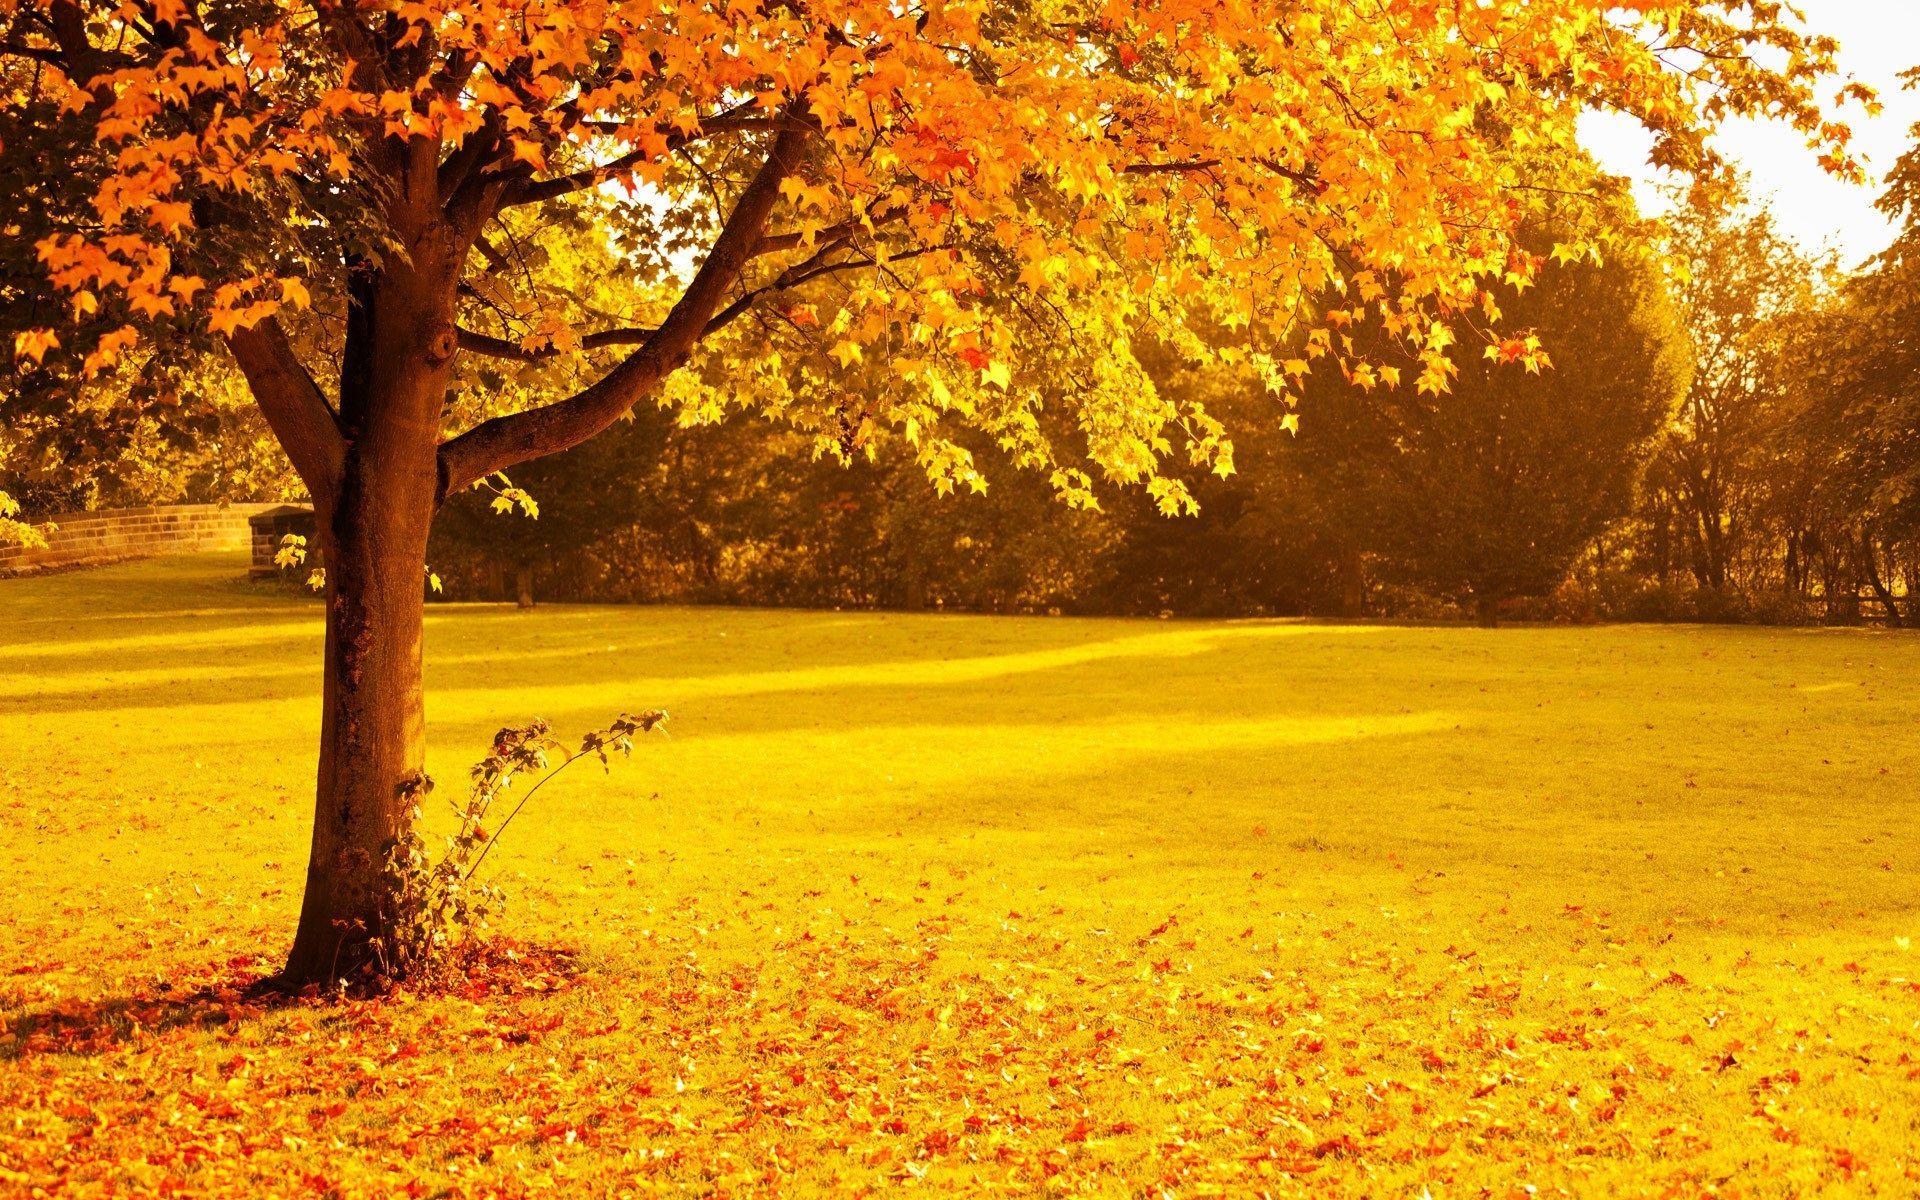 HQ Wallpaper Plus provides different size of Yellow Autumn